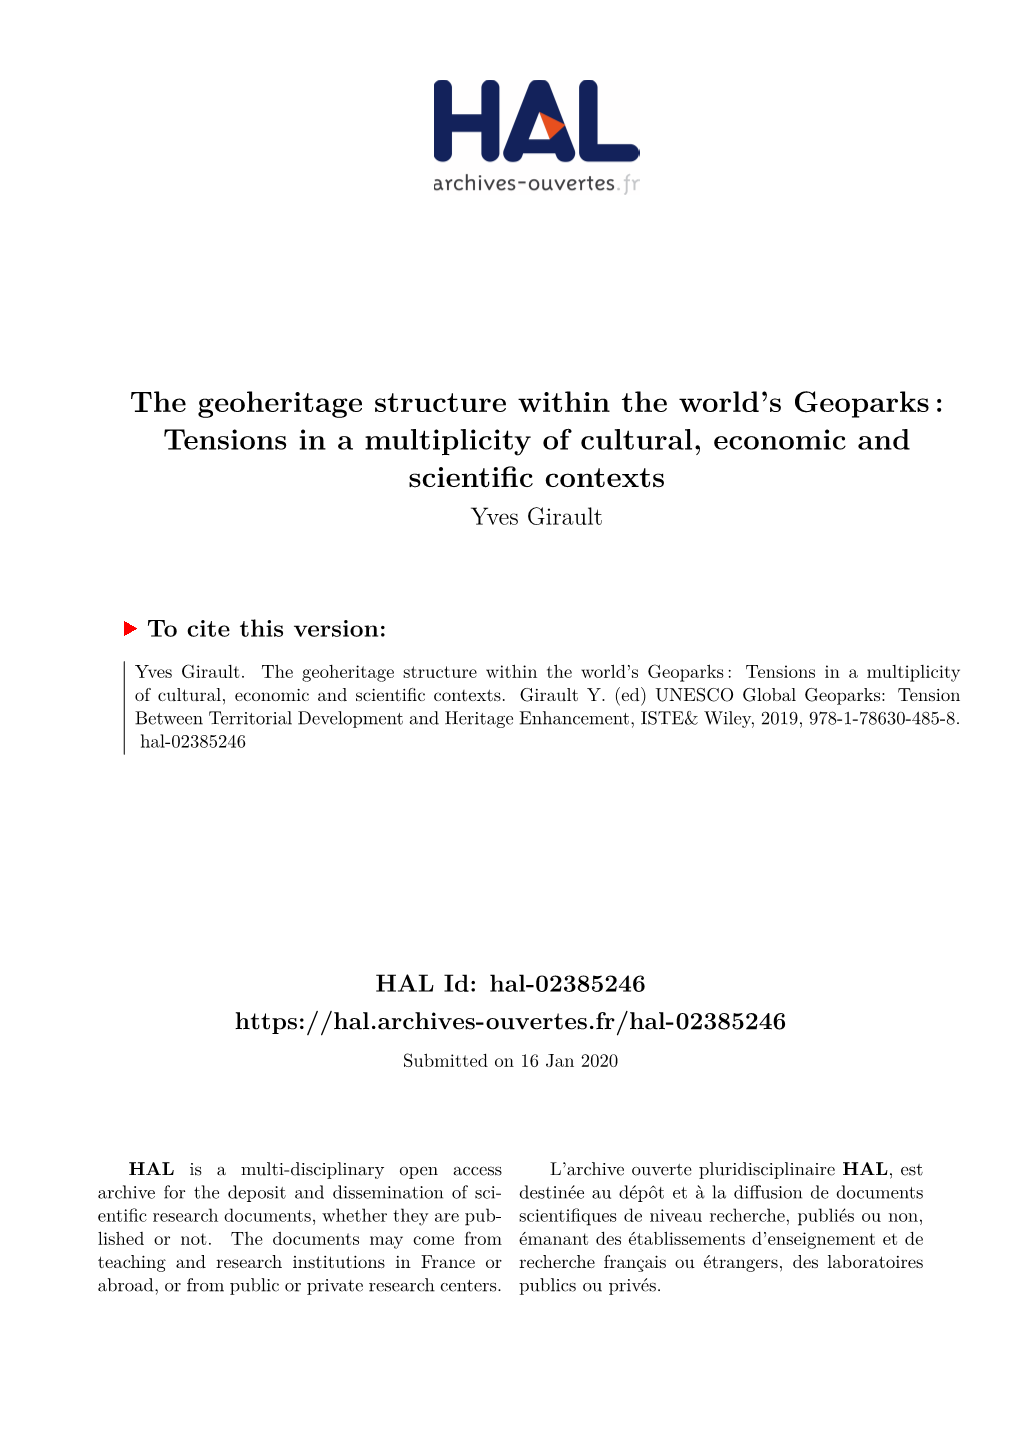 The Geoheritage Structure Within the World's Geoparks